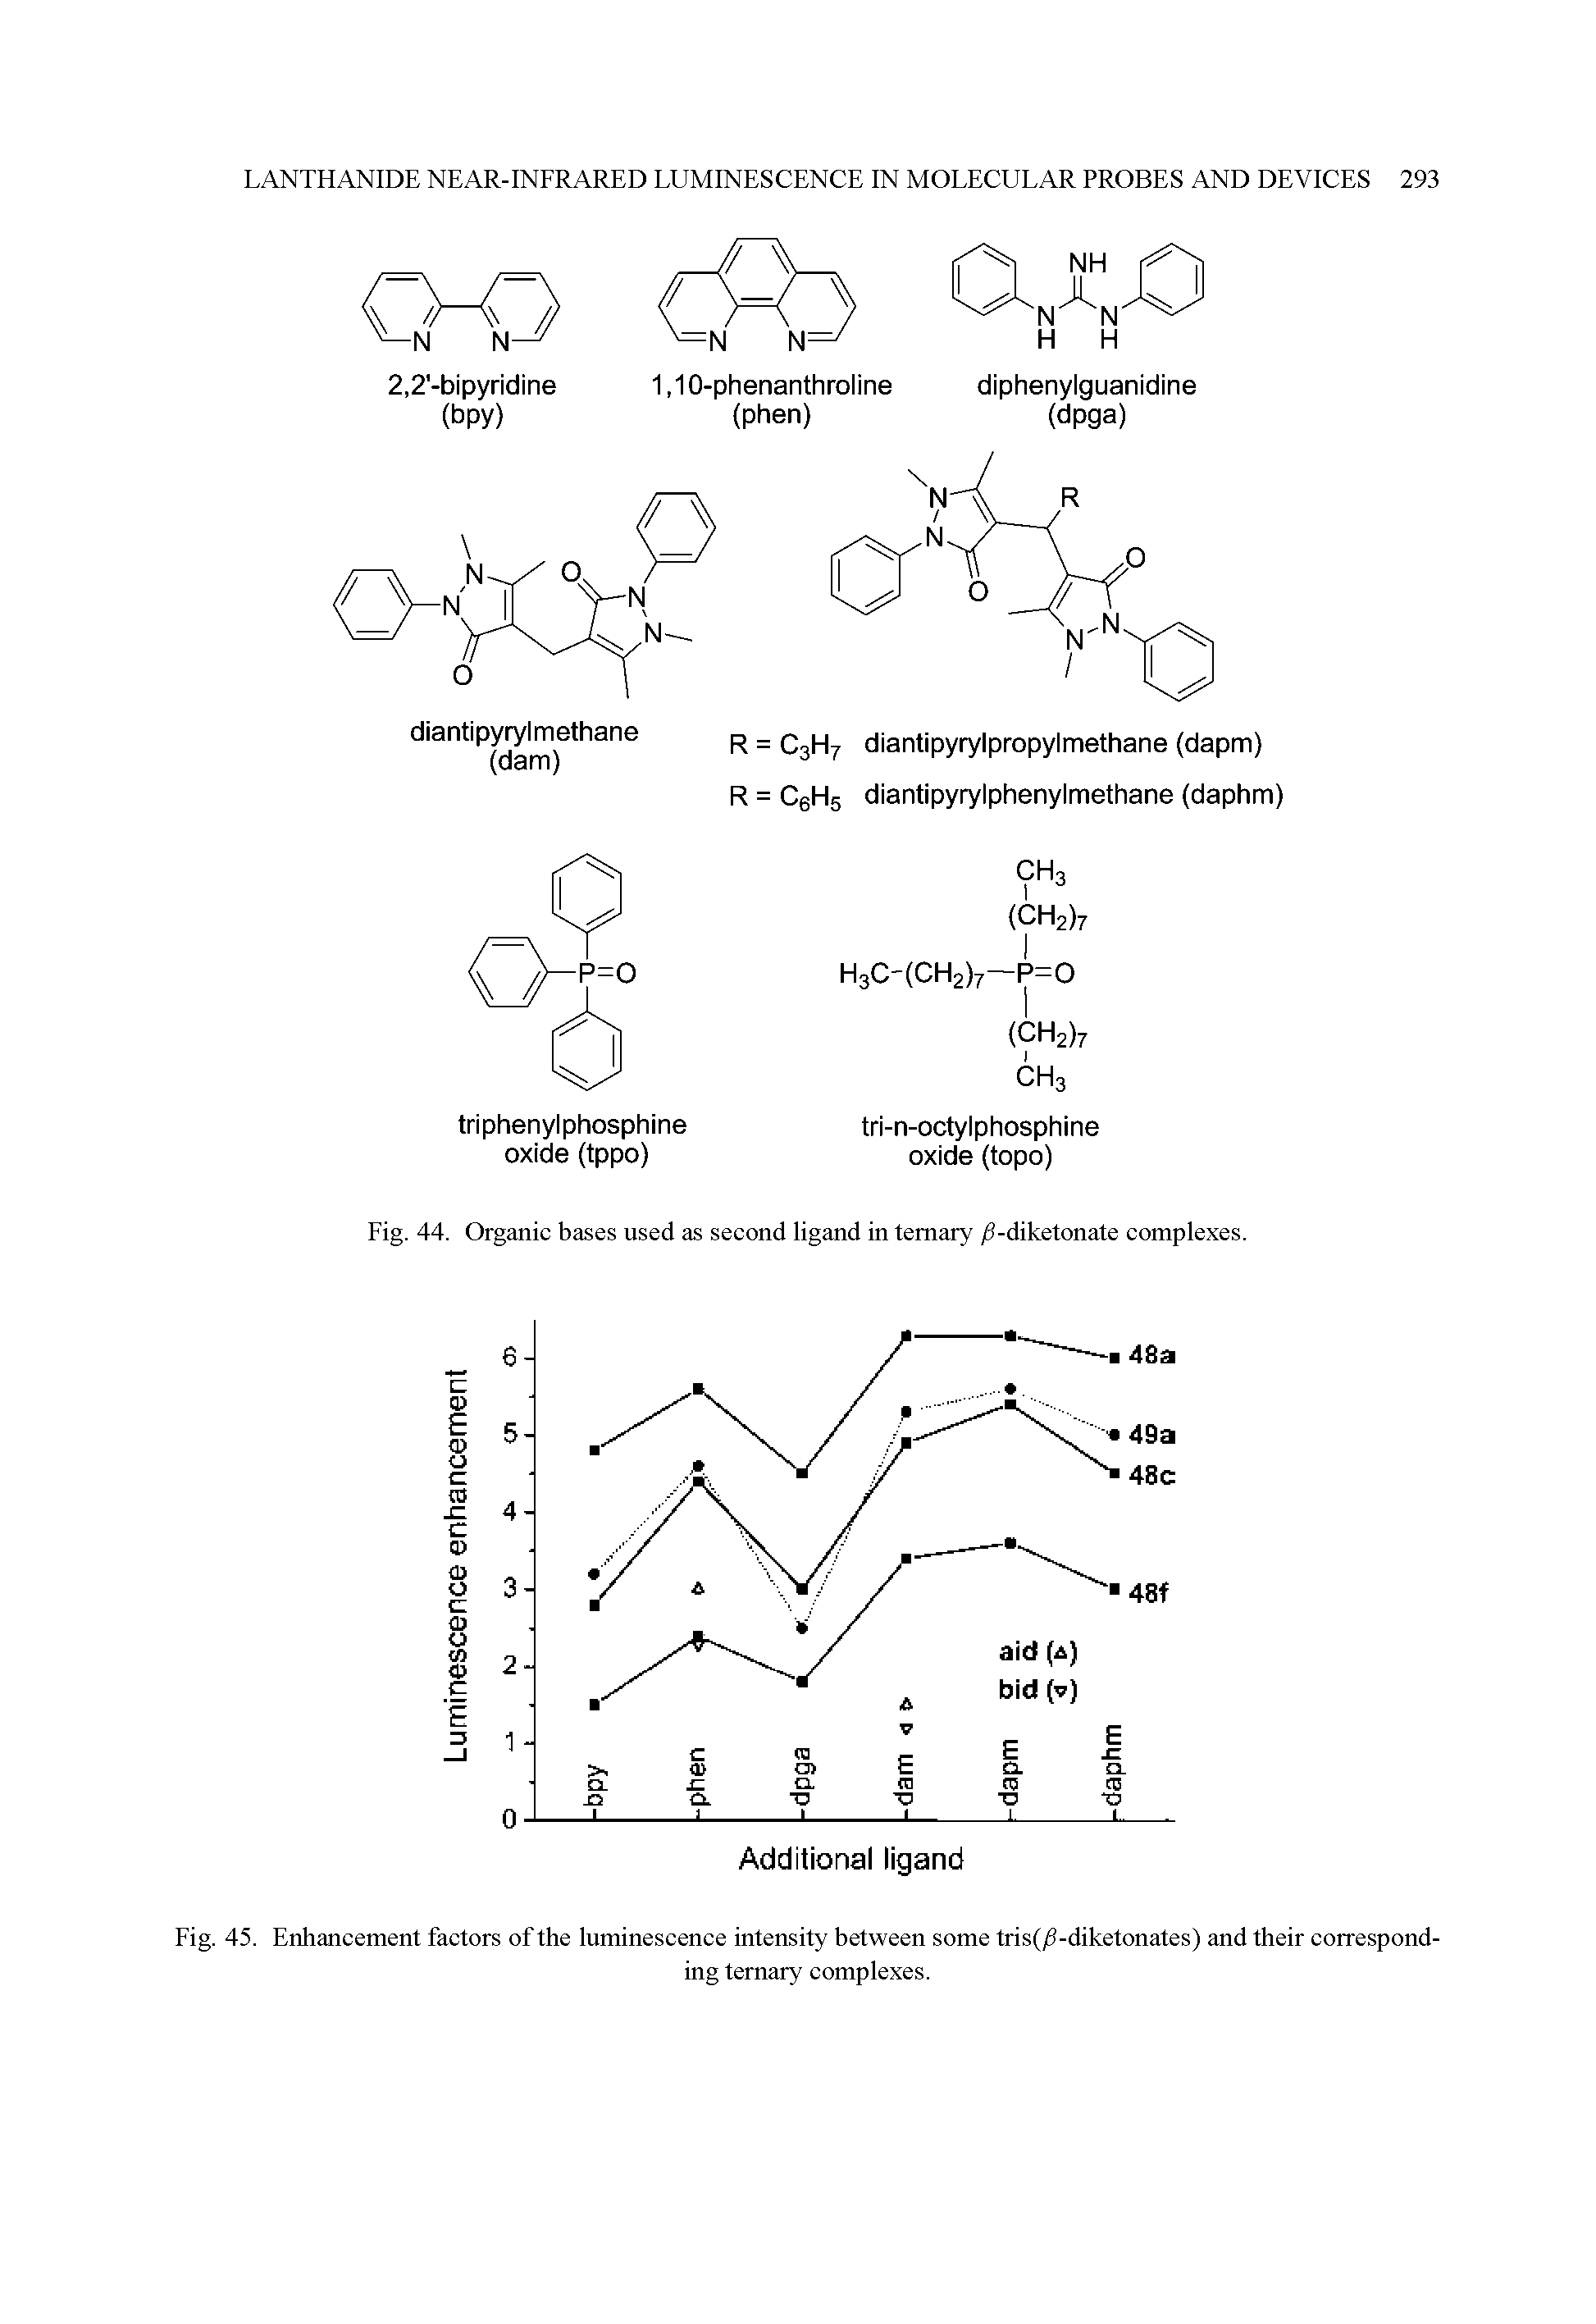 Fig. 45. Enhancement factors of the luminescence intensity between some tris(/i-diketonates) and their corresponding ternary complexes.